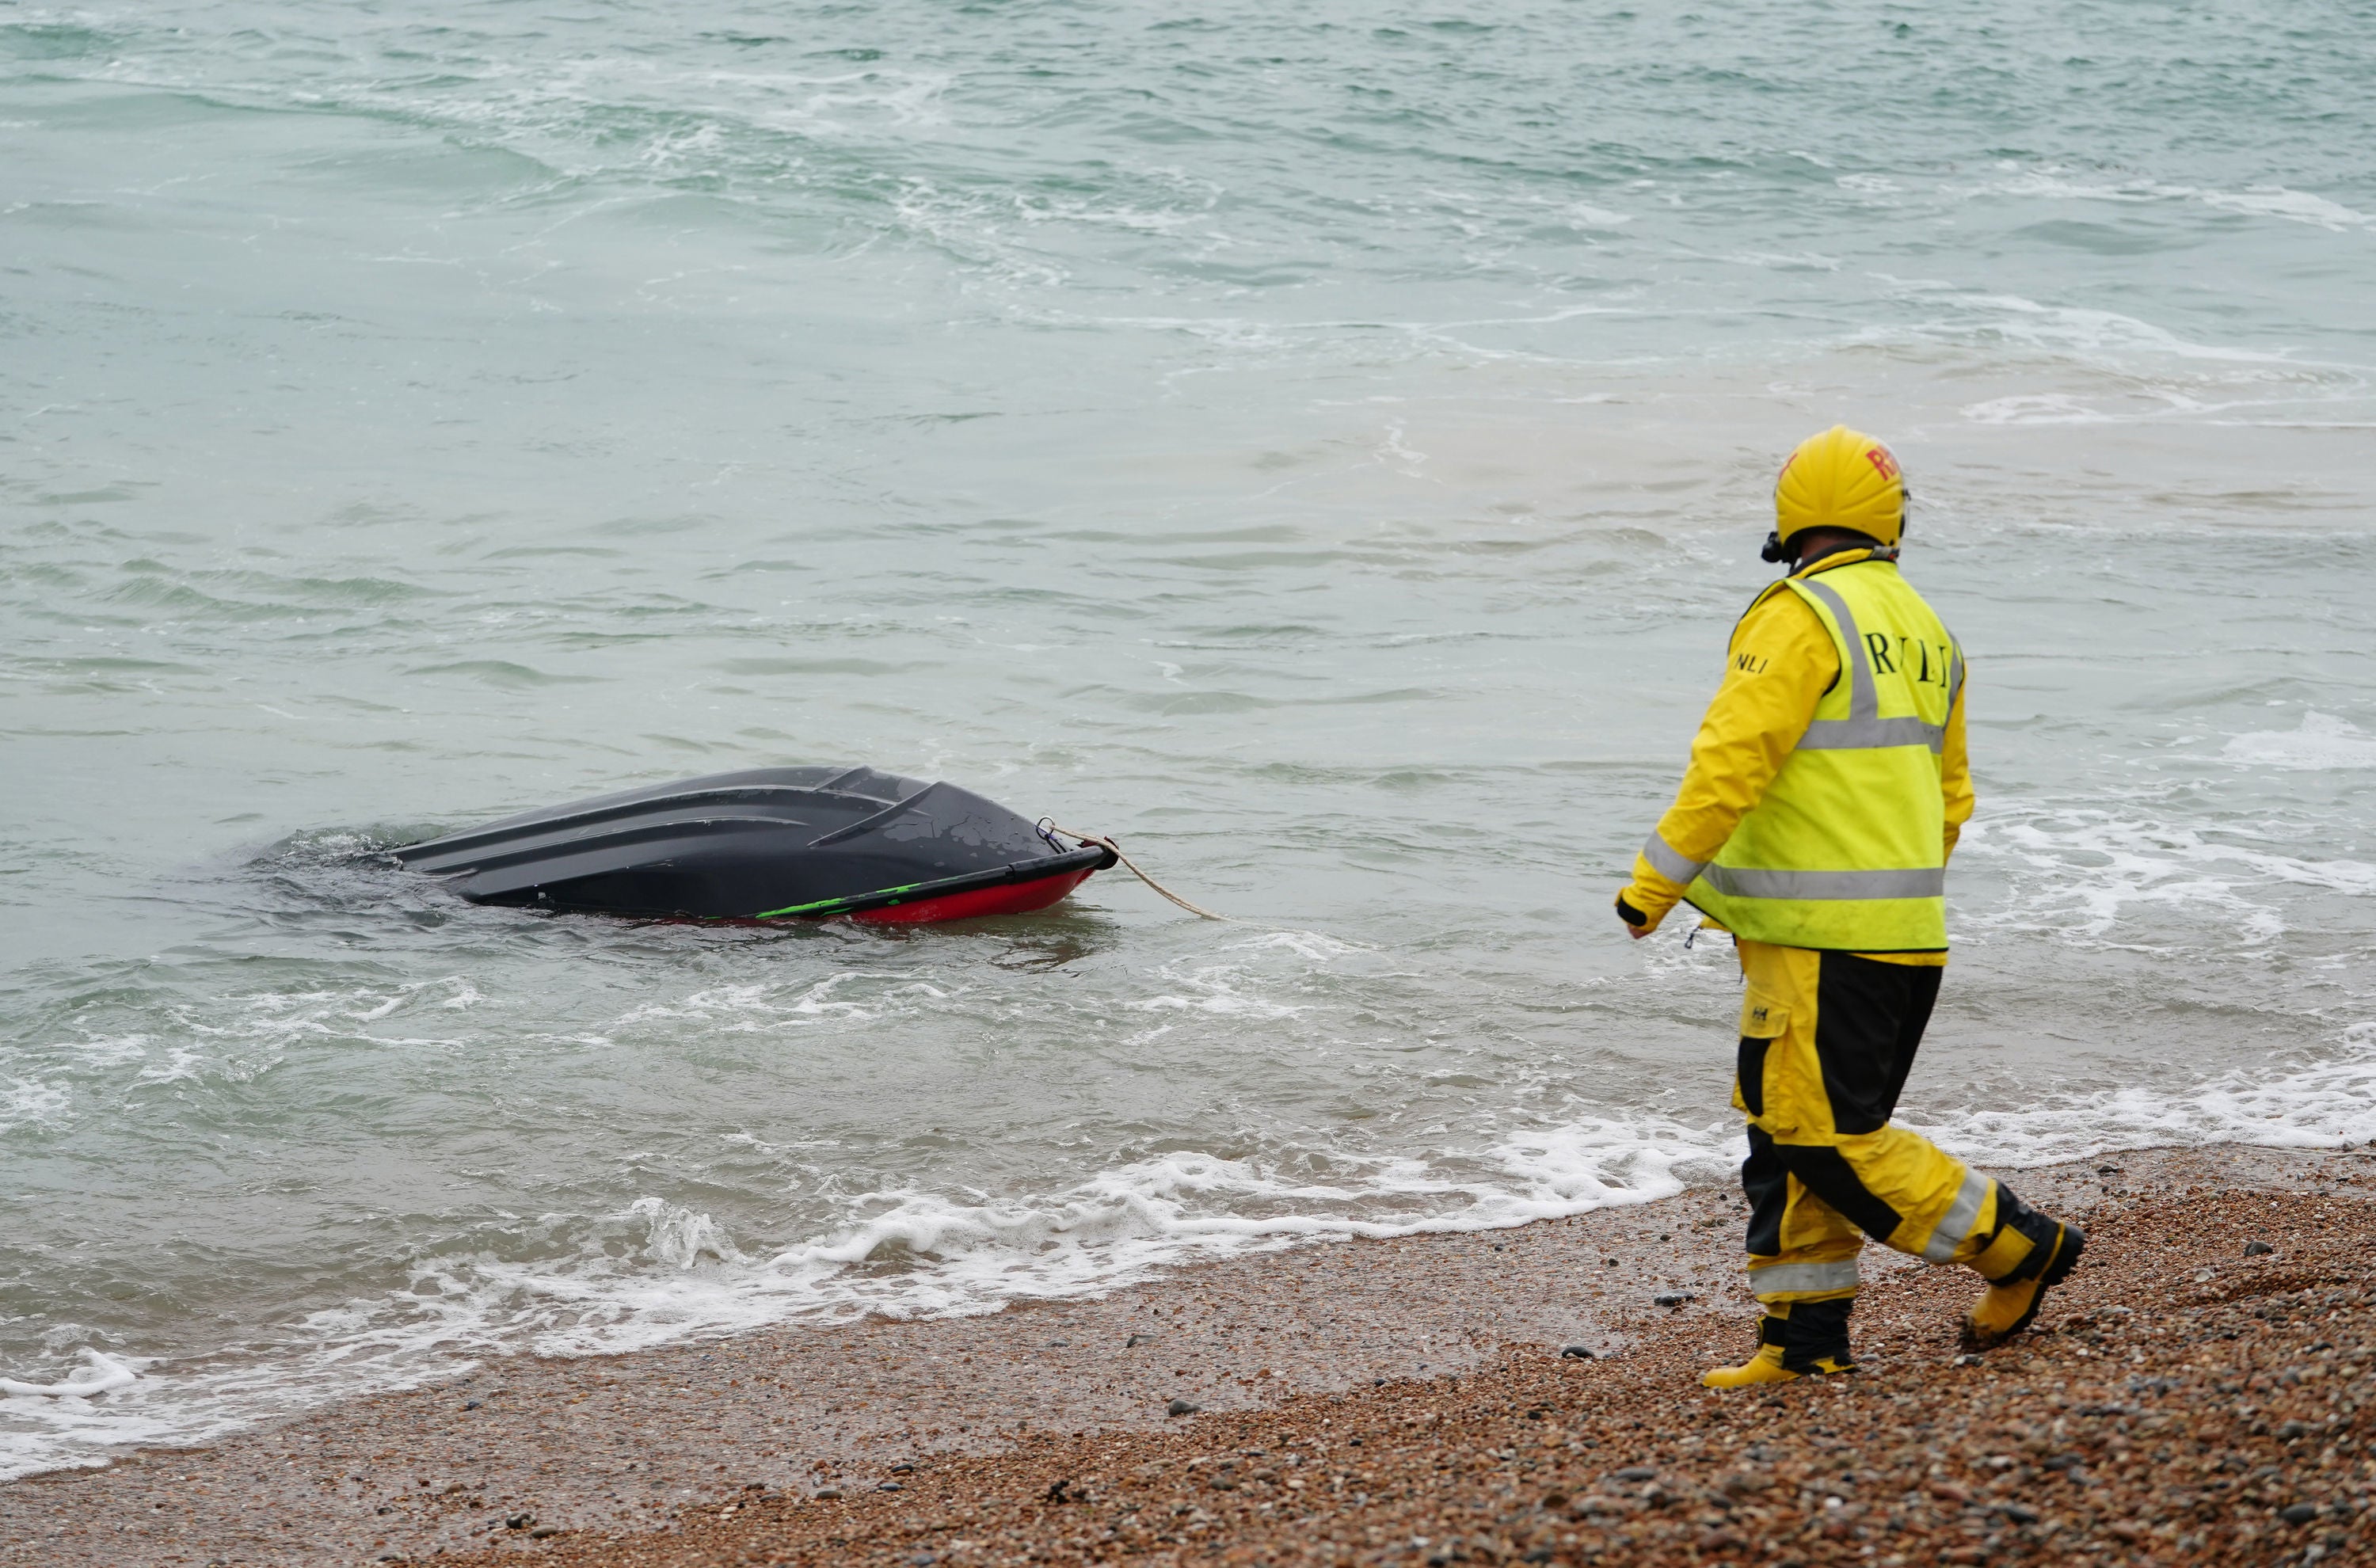 A jet ski thought to have been used in a migrant crossing is brought in to Dungeness, Kent, by the RNLI after being intercepted in the Channel.